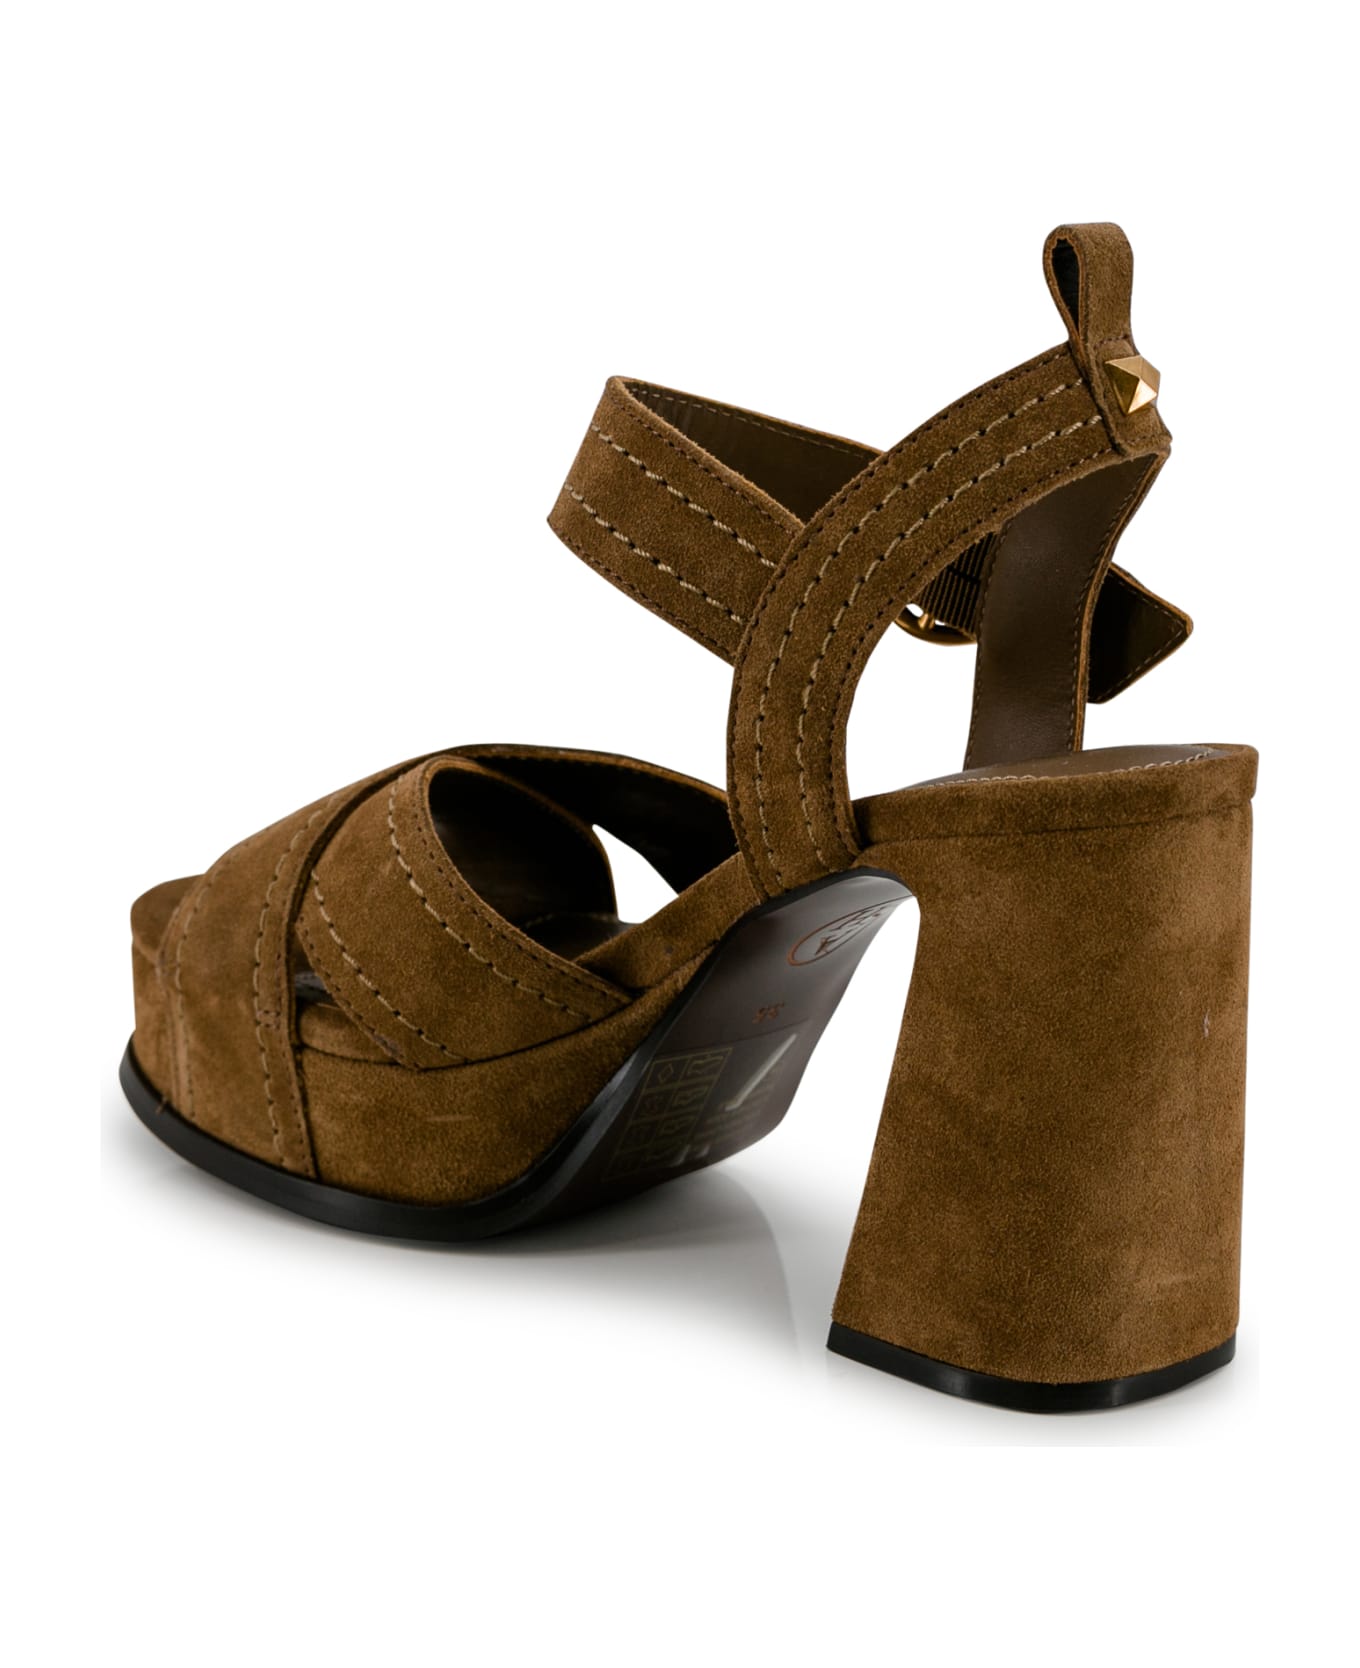 Ash Melany 100mm Sandals - Suede